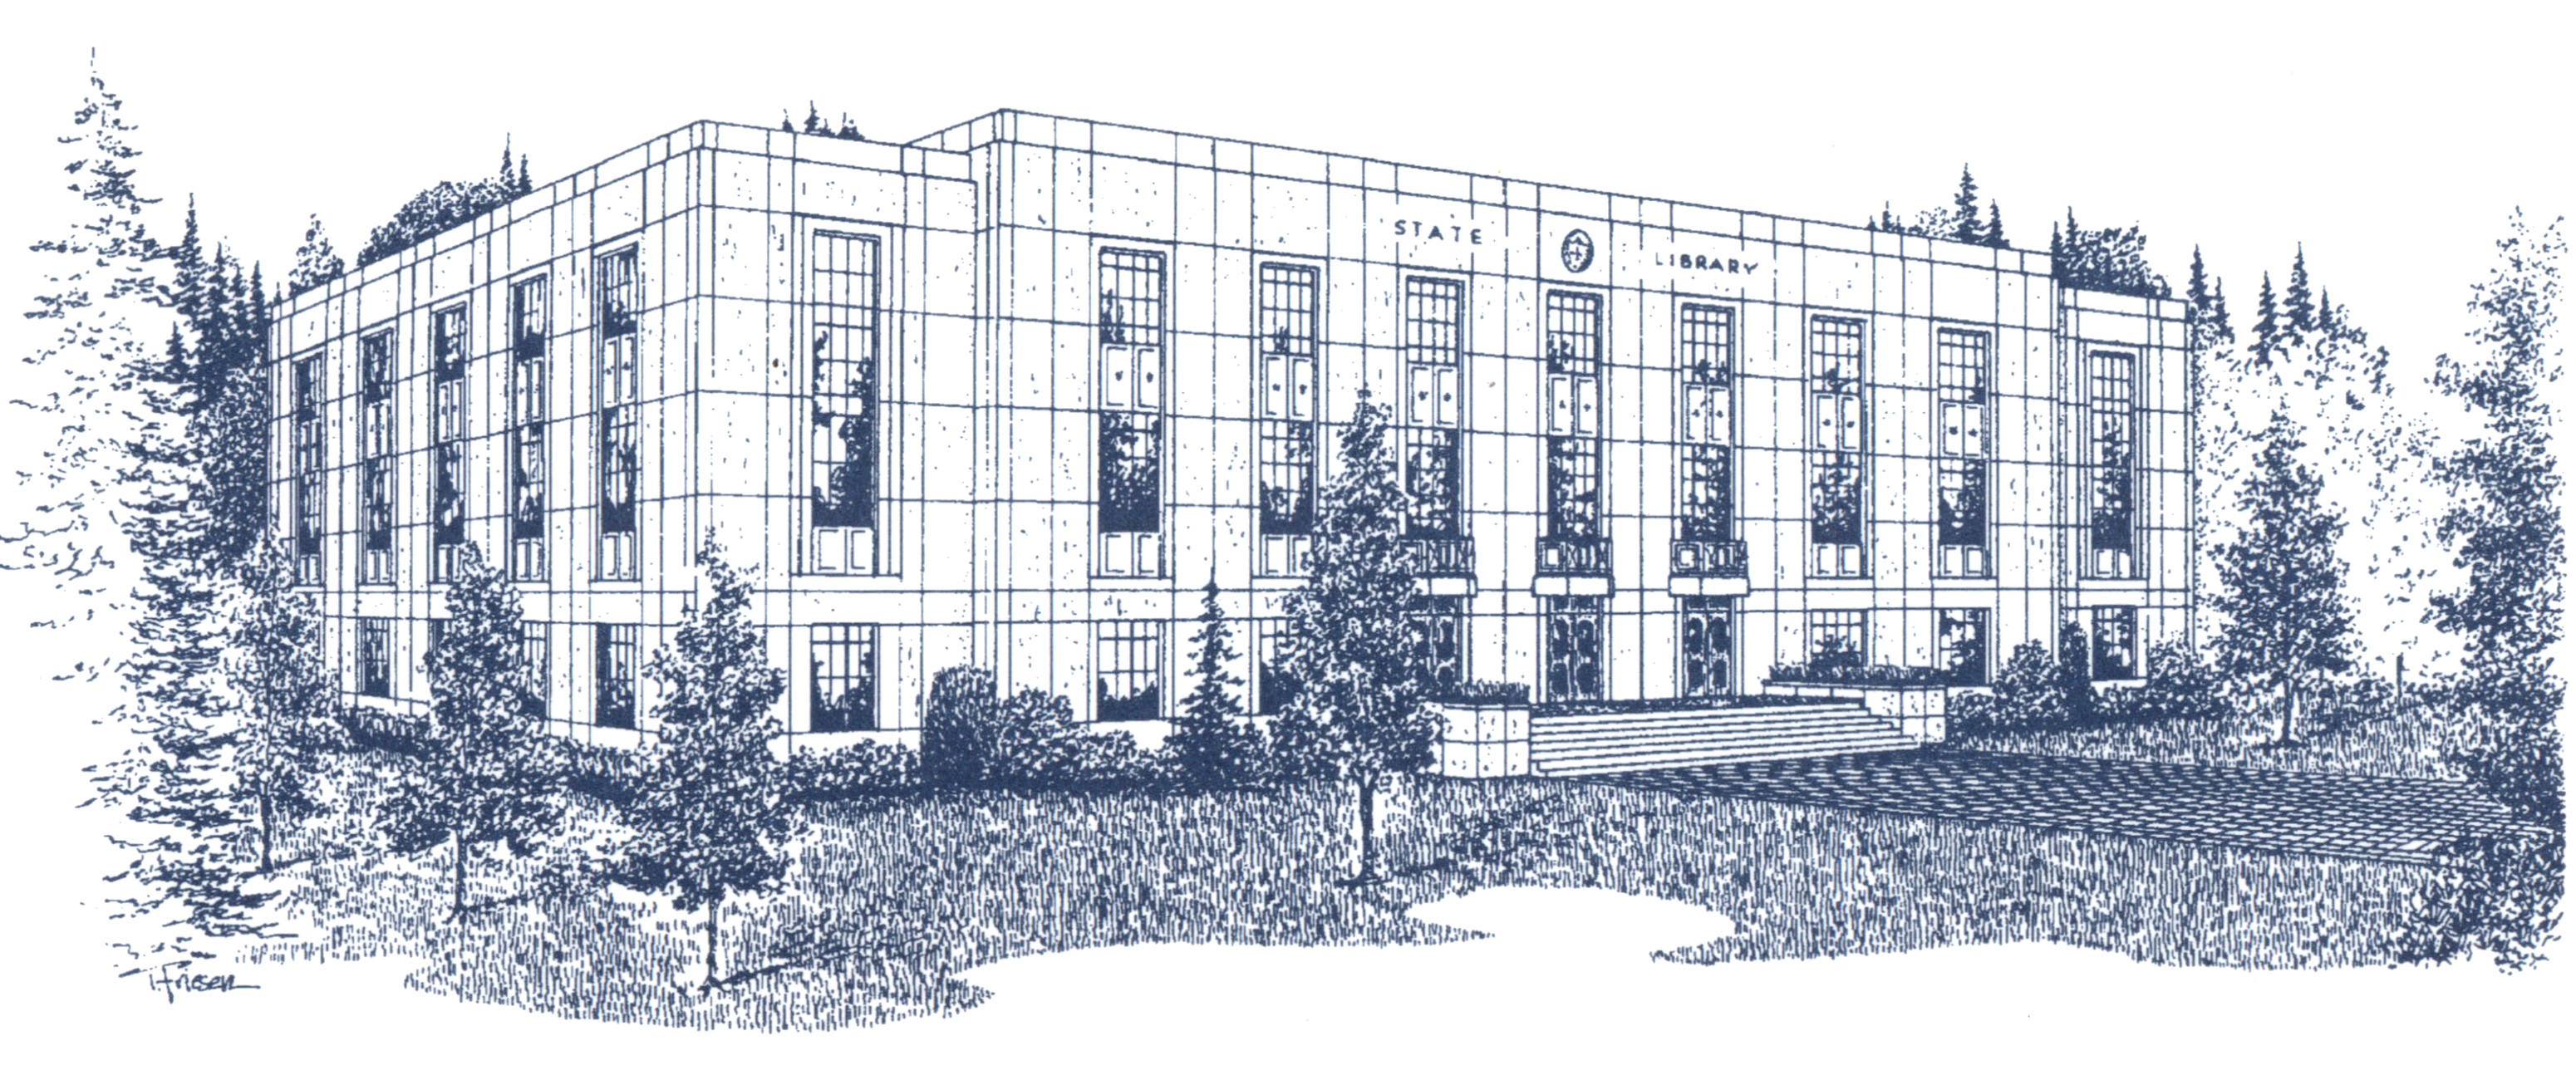 Line drawing of the State Library of Oregon building